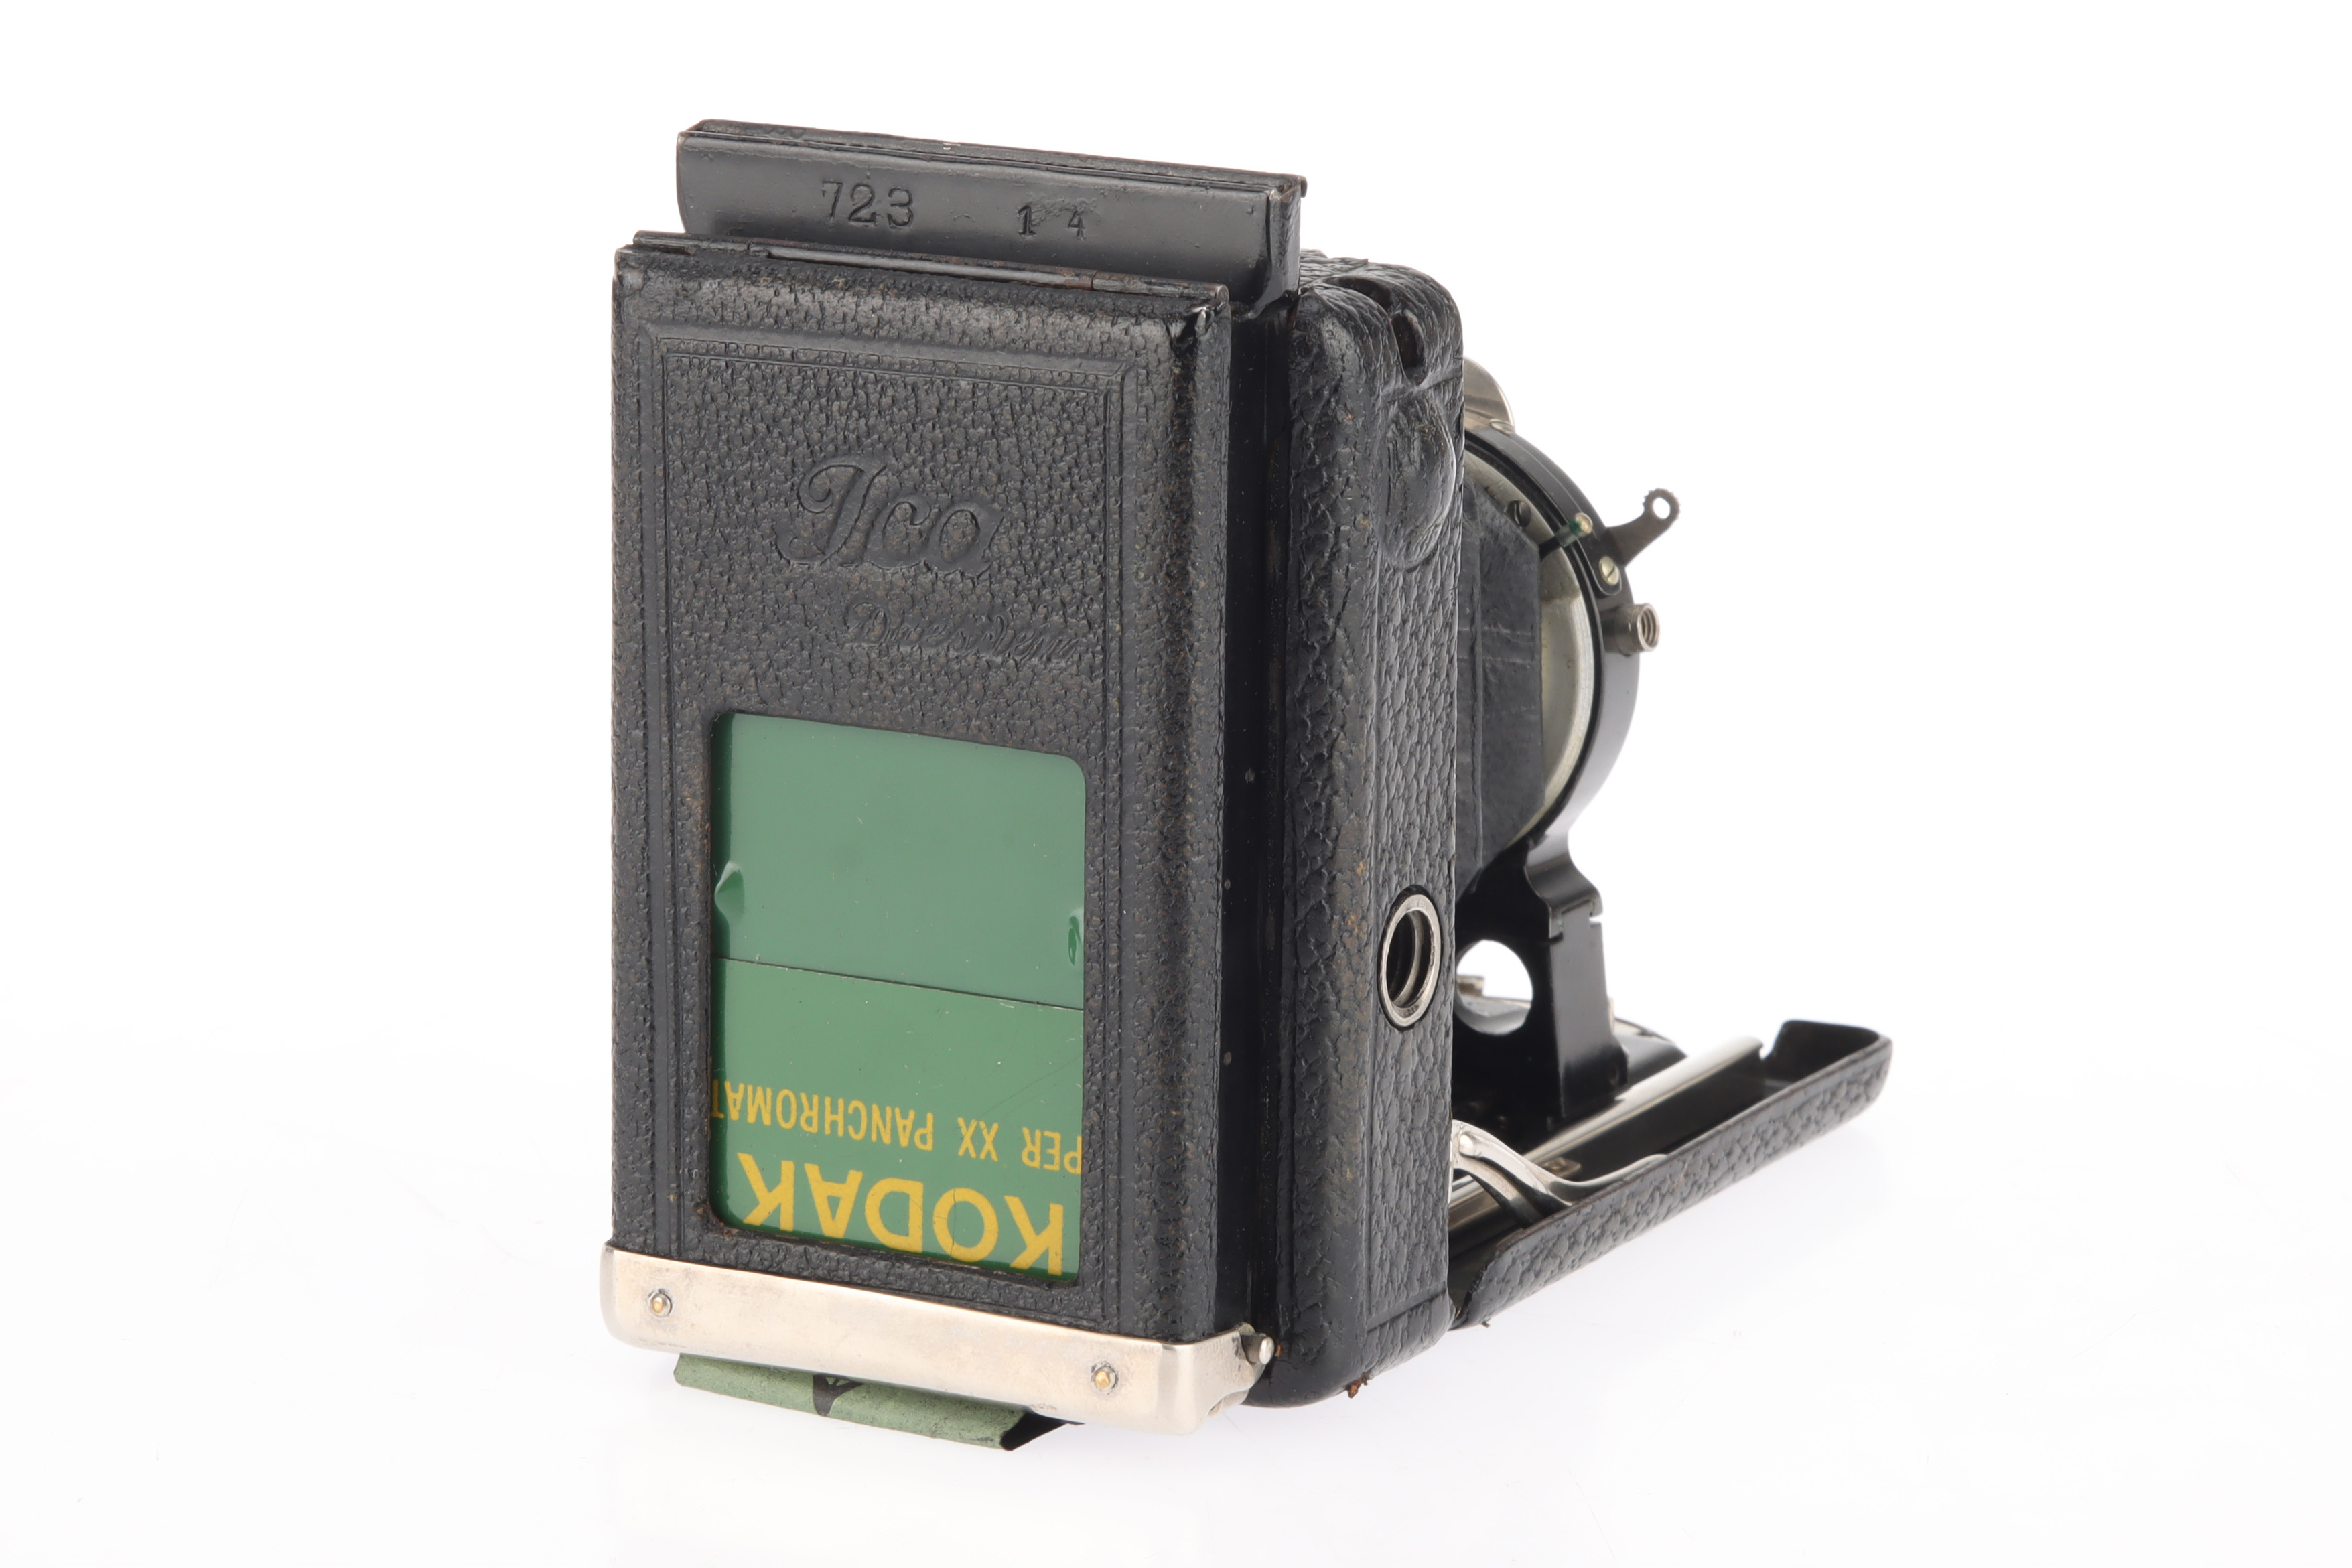 An ICA Victrix Folding Camera, - Image 2 of 3